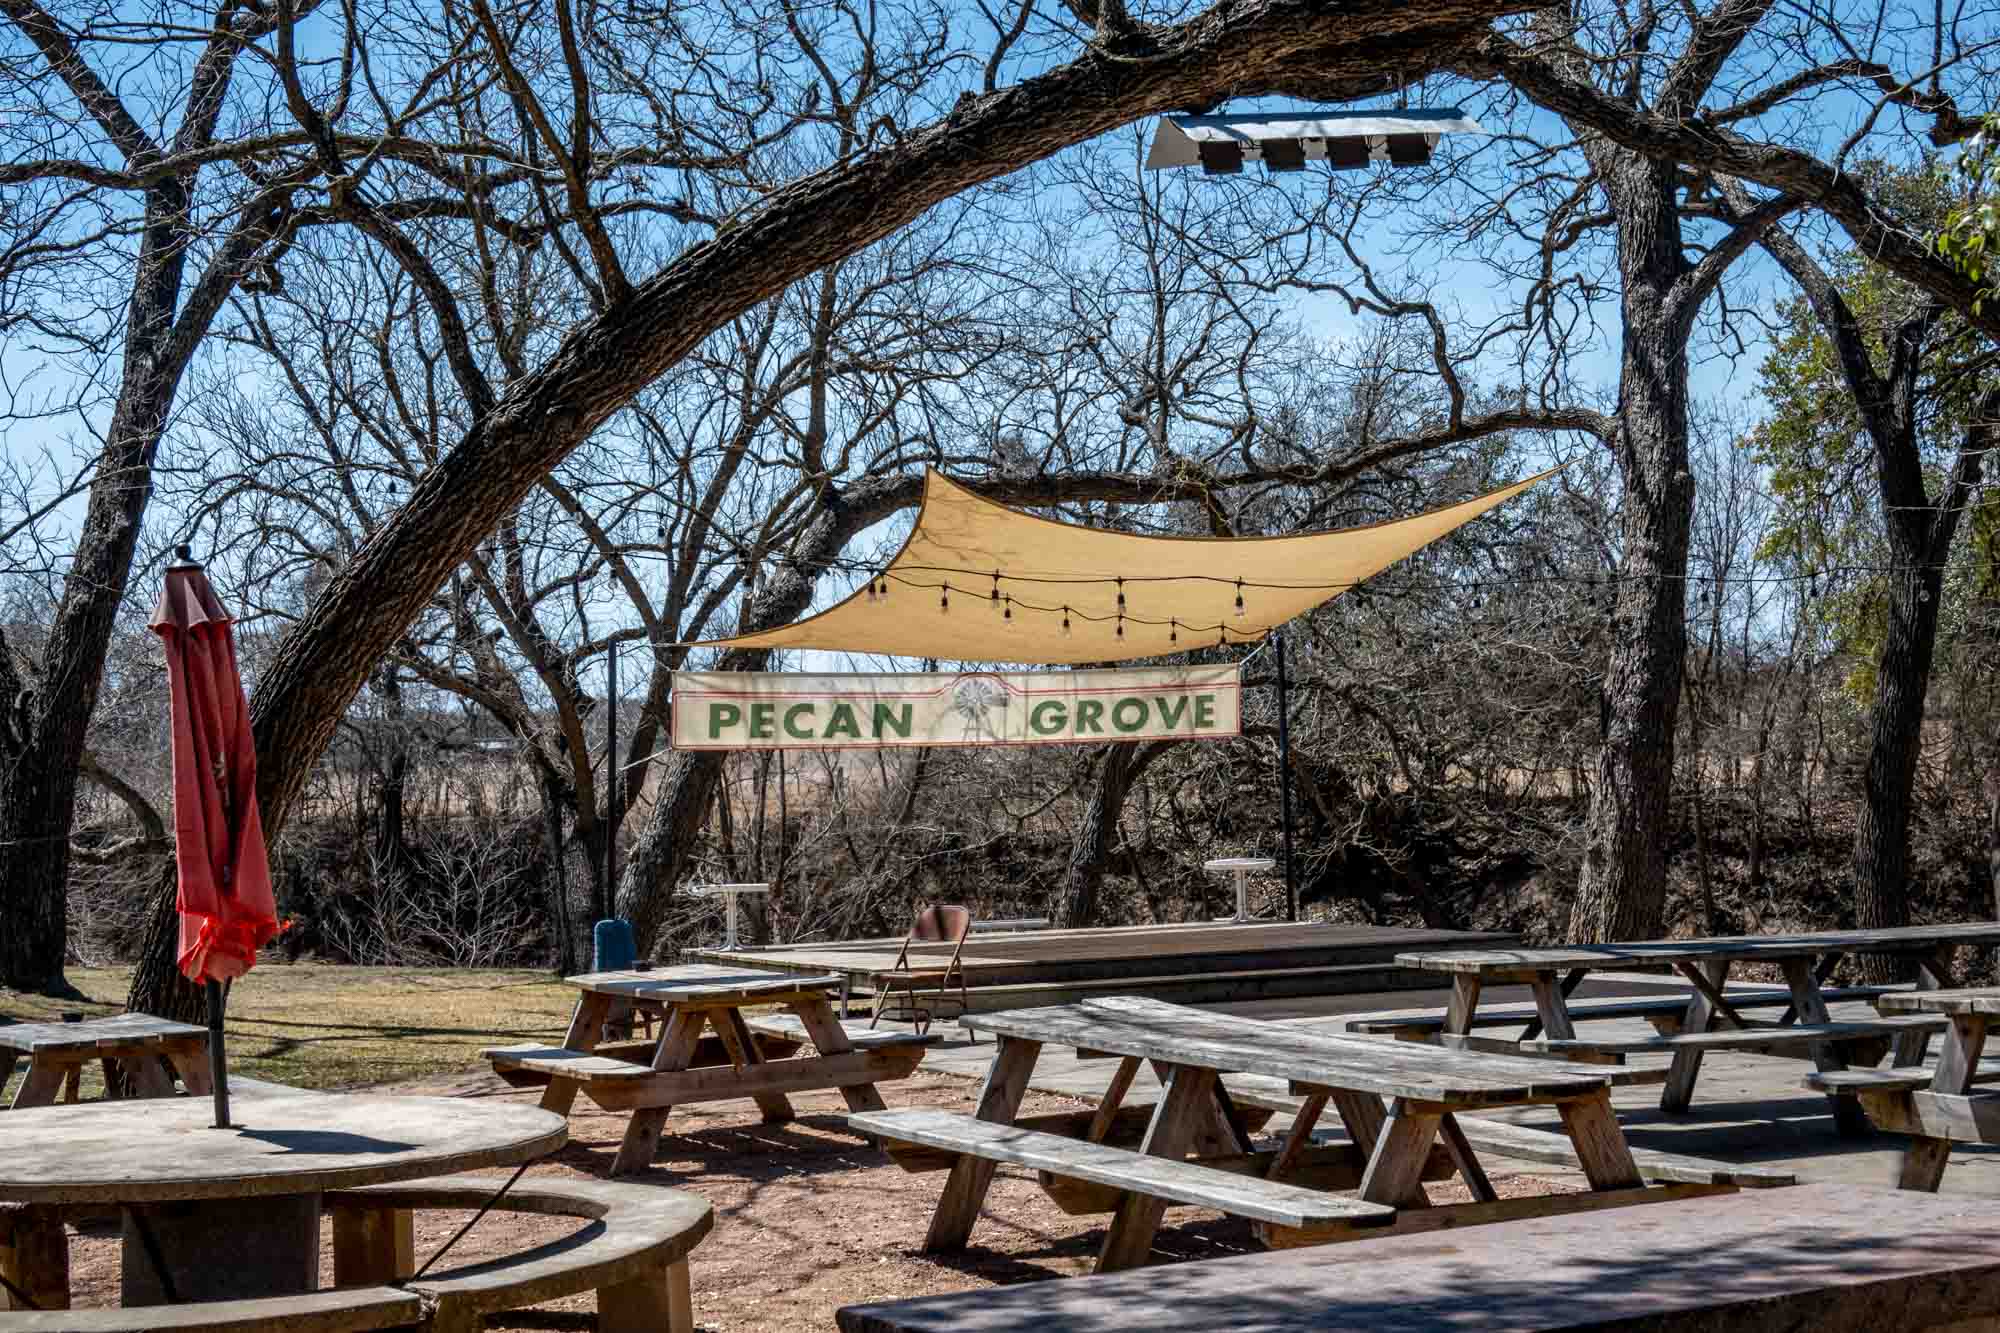 Picnic tables under trees with a wooden stage and sign for 